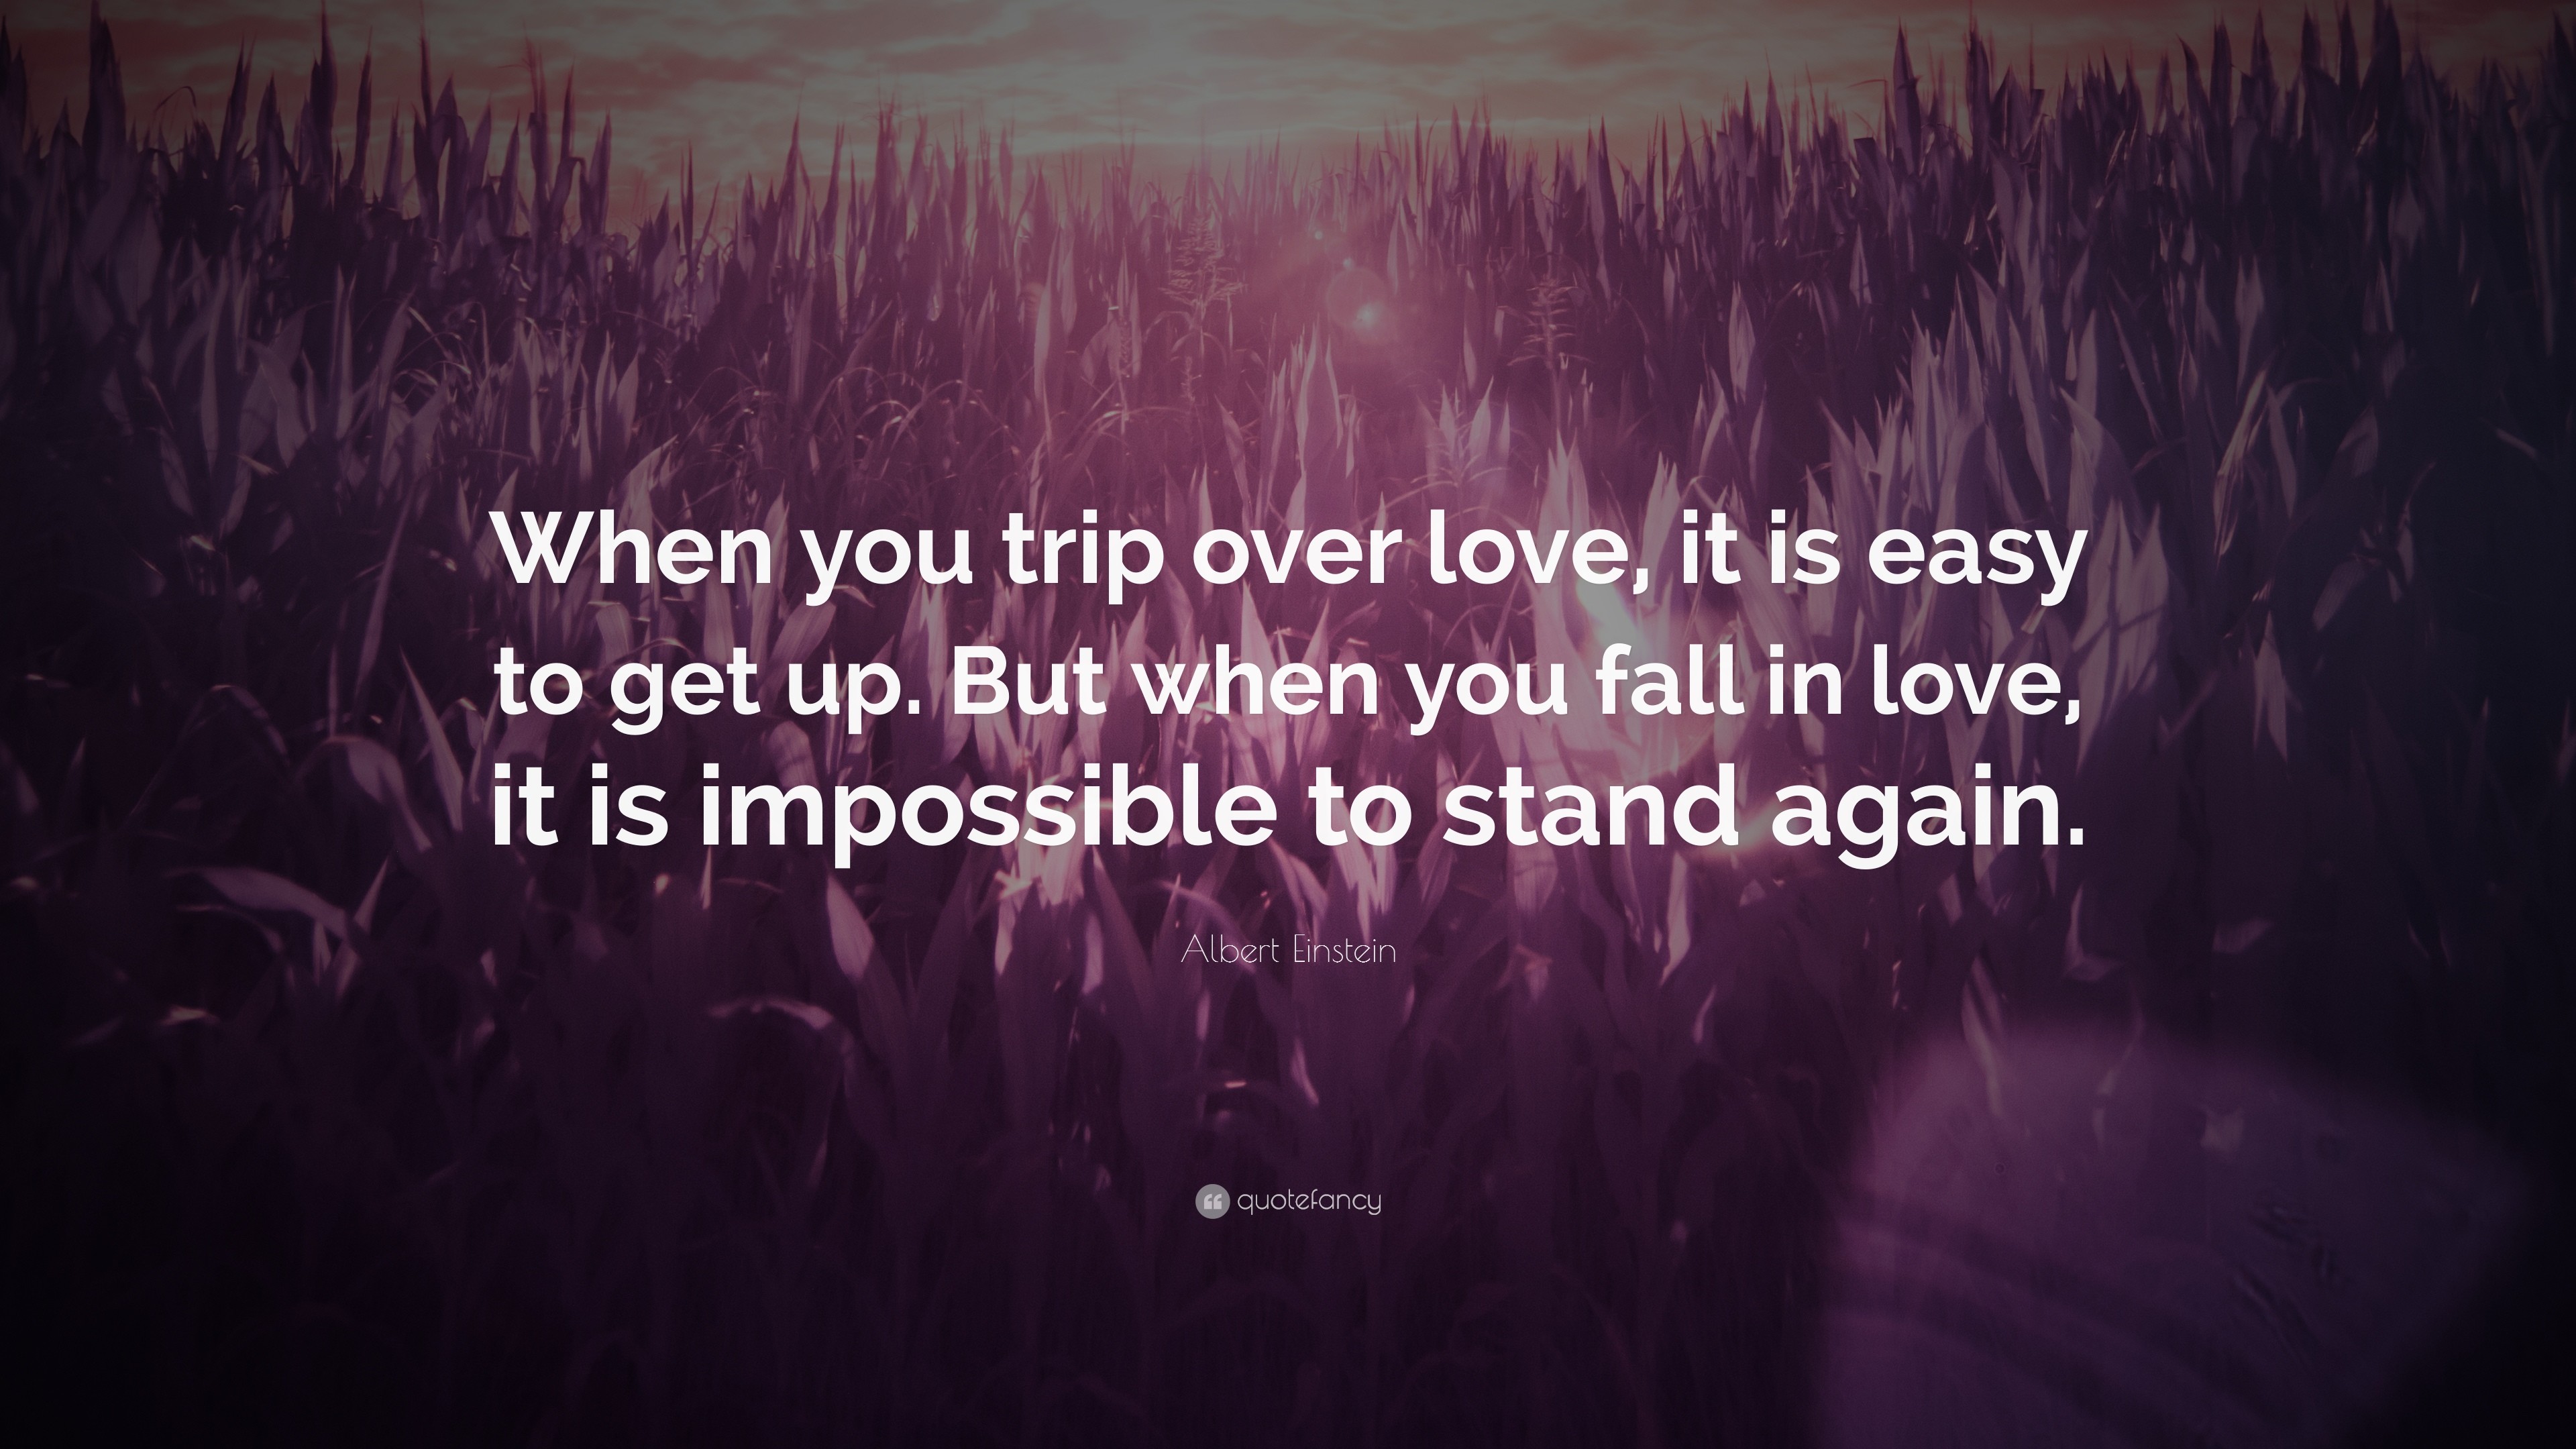 3840x2160 Albert Einstein Quote: “When you trip over love, it is easy to get